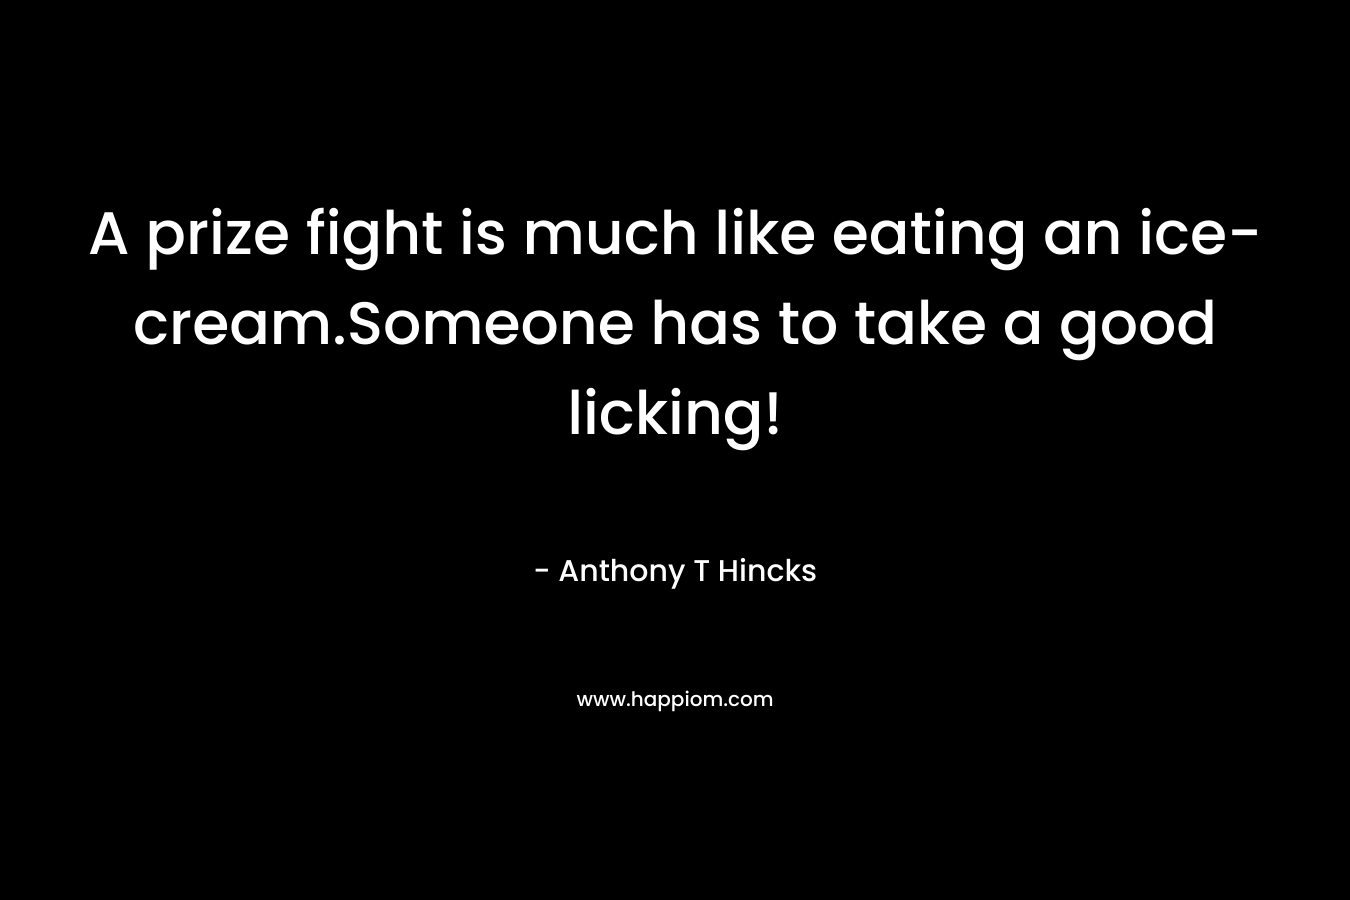 A prize fight is much like eating an ice-cream.Someone has to take a good licking!